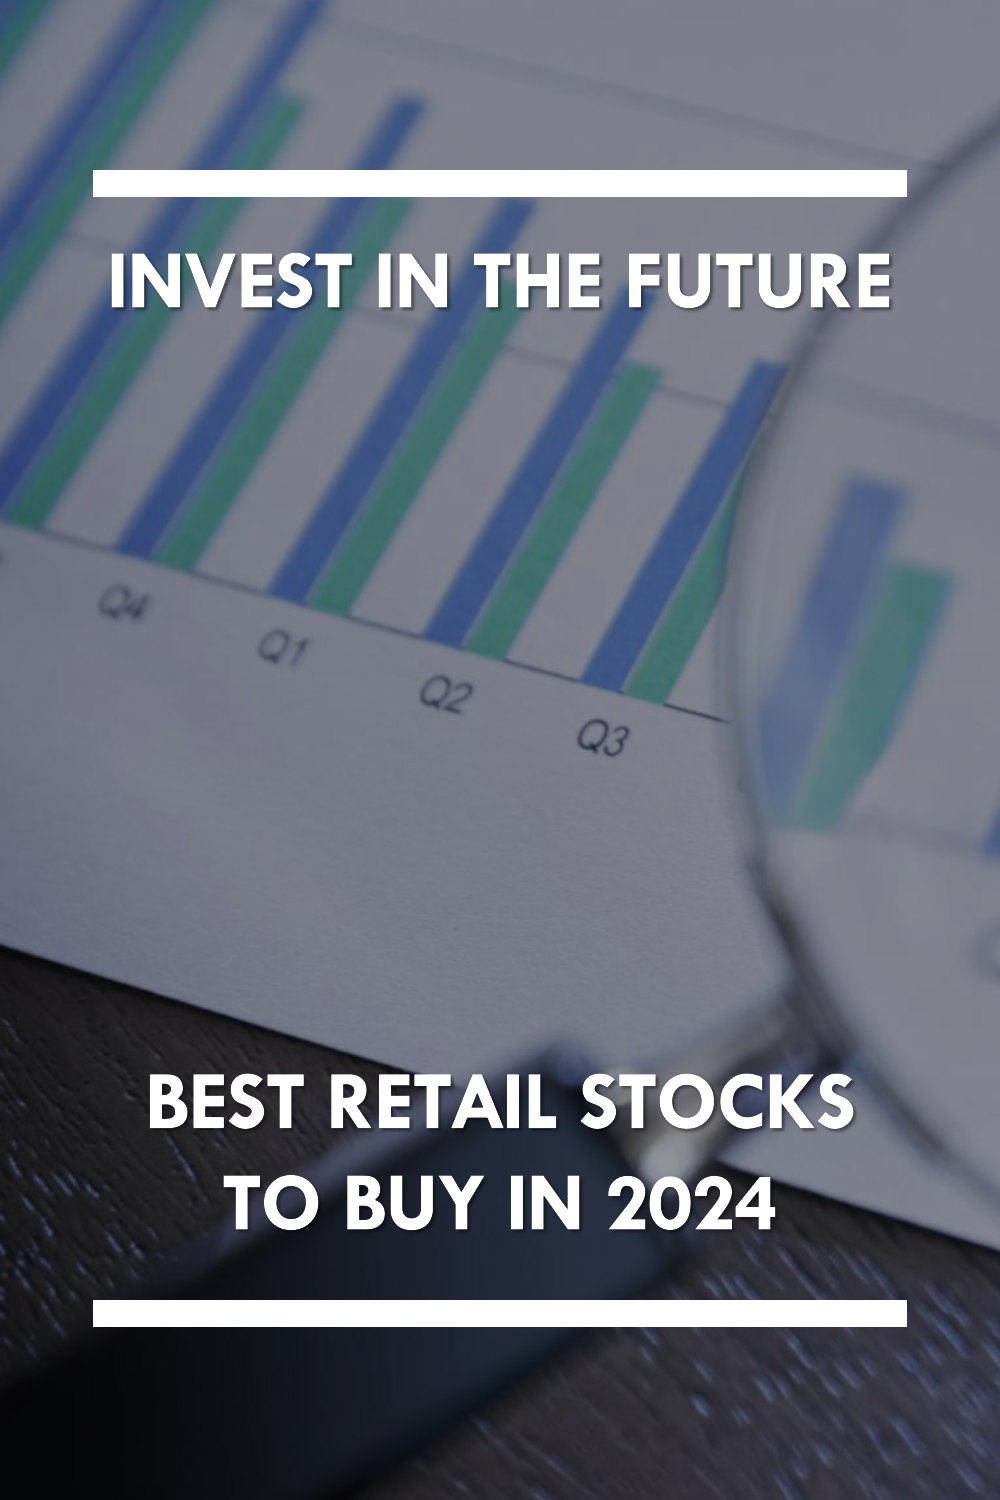 The best retail stocks to buy in 2024: Invest in your Future